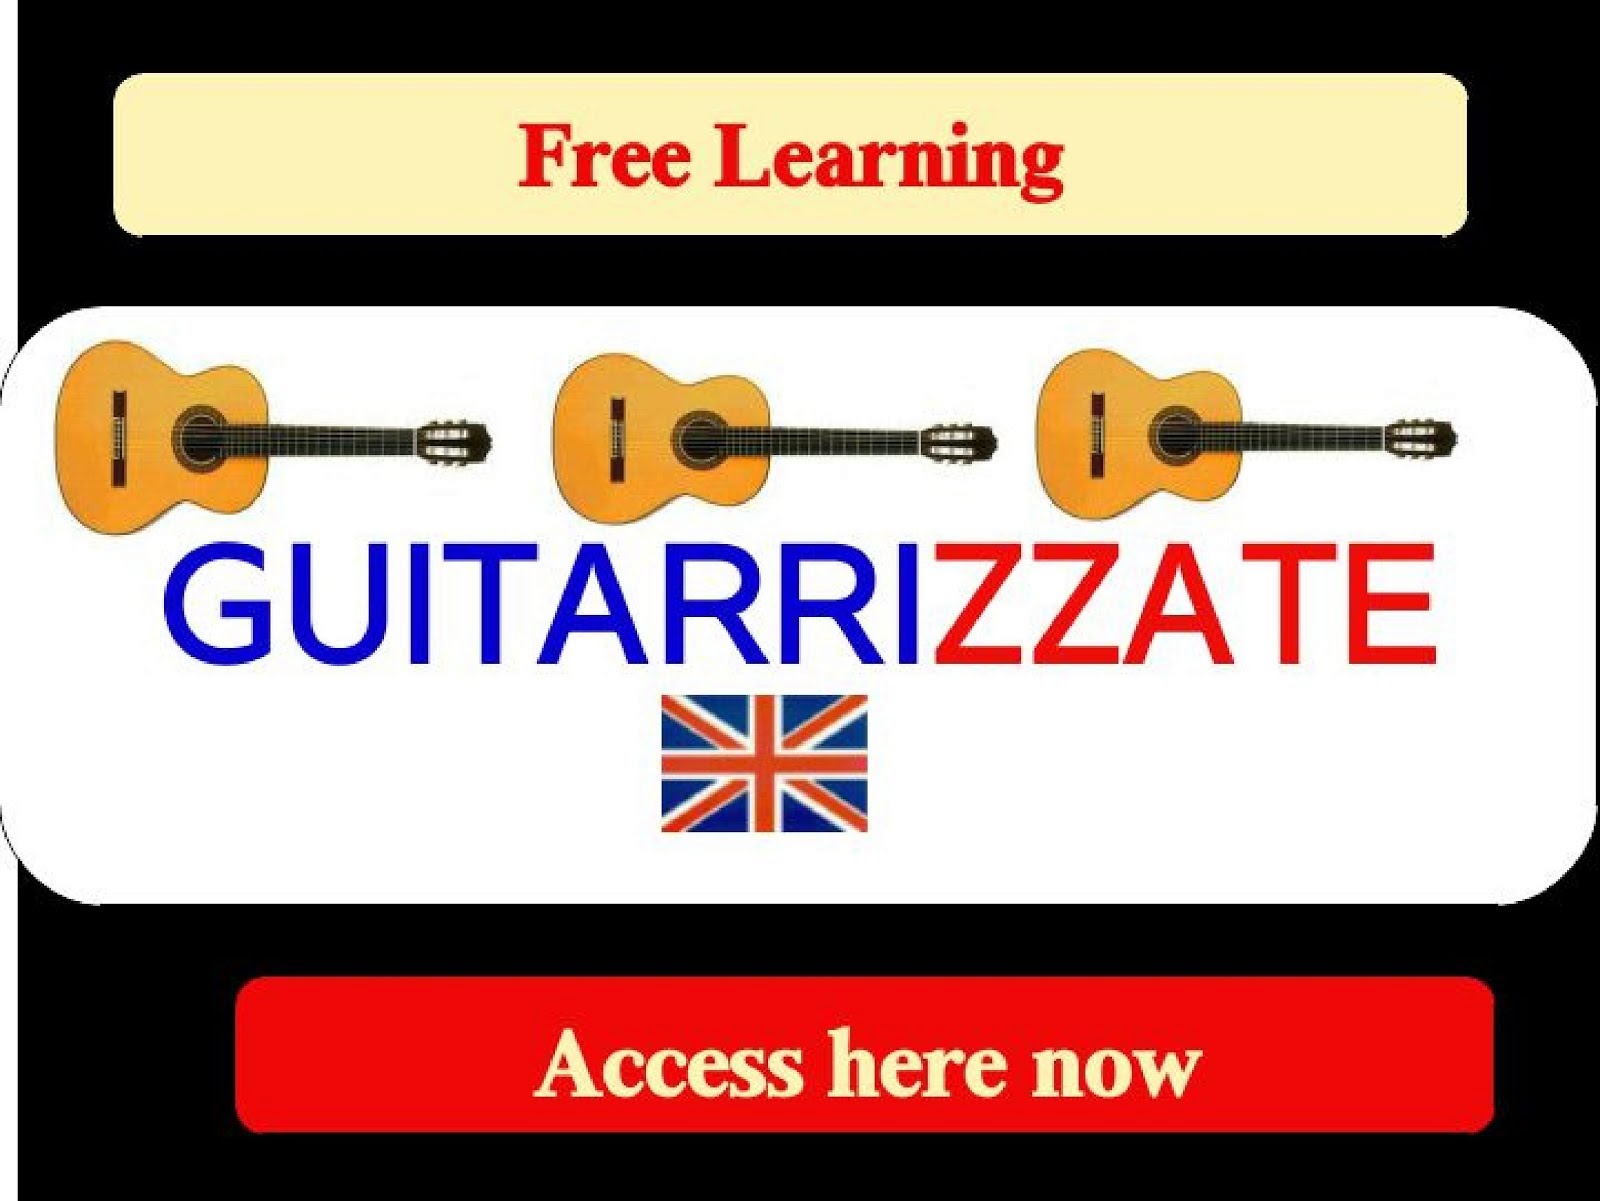 GUITARRIZZATE access now, Free Learning